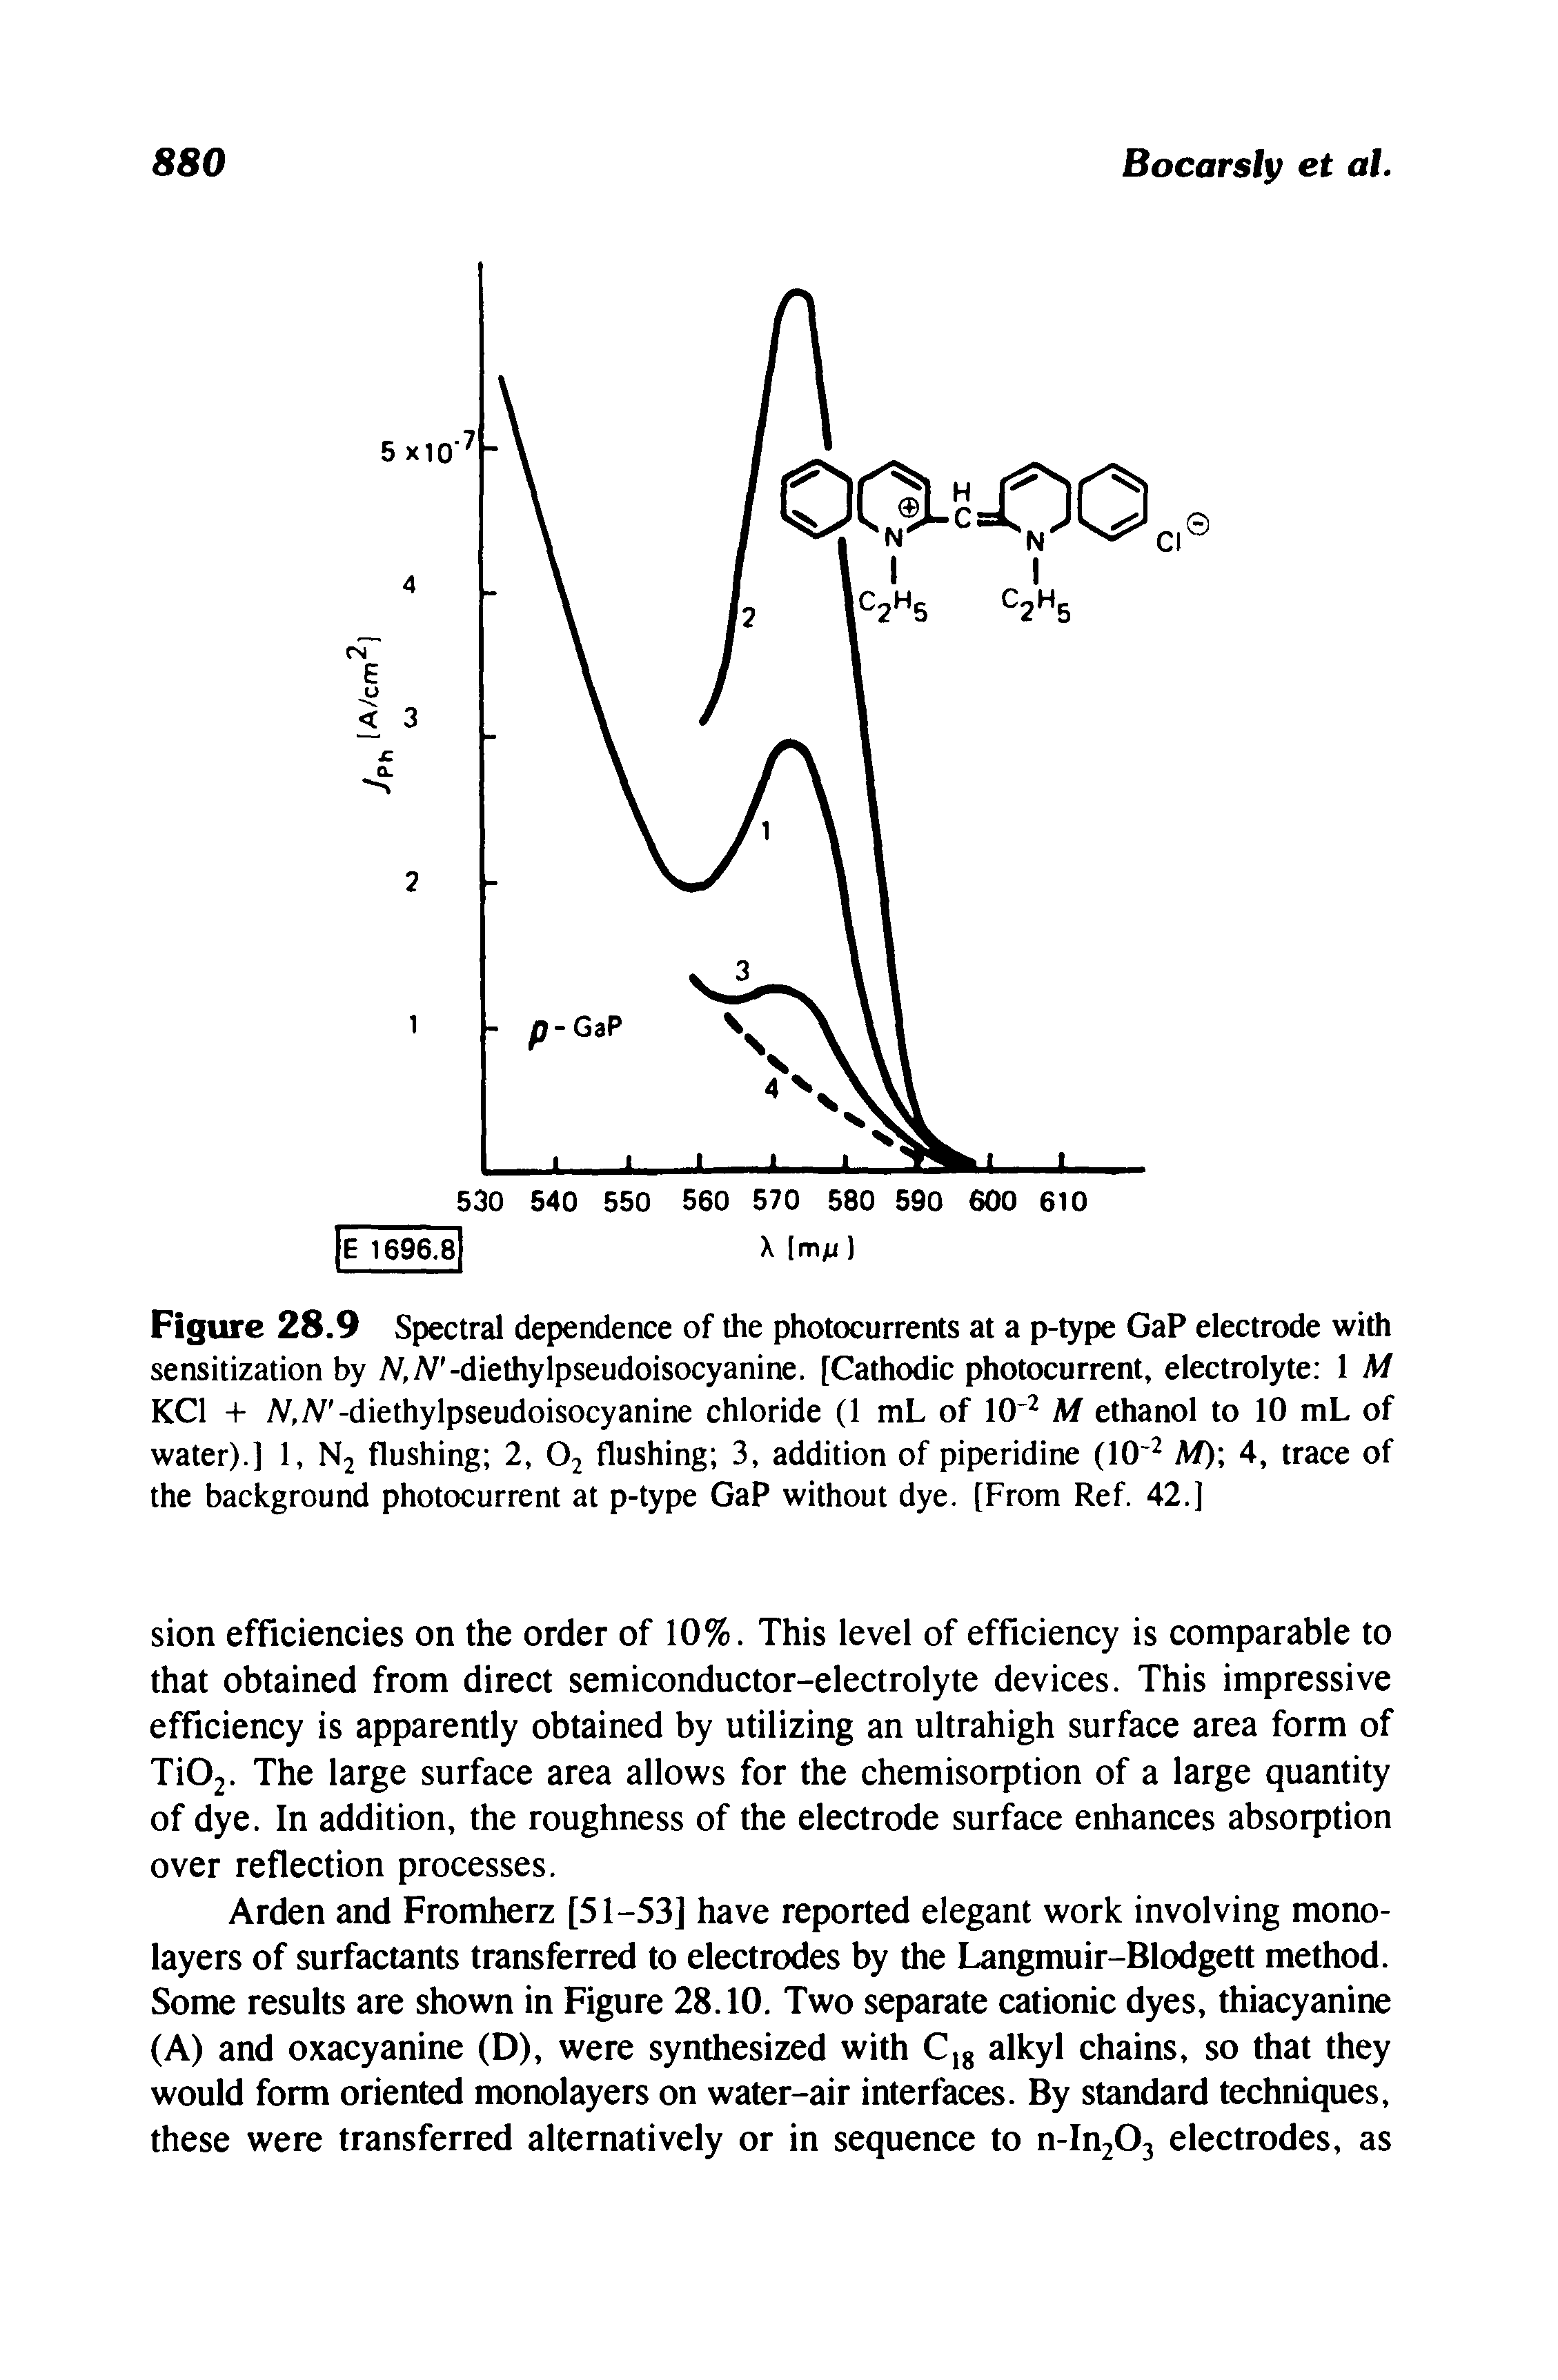 Figure 28.9 Spectral dependence of the photocurrents at a p-type GaP electrode with sensitization by N, N -diethylpseudoisocyanine. [Cathodic photocurrent, electrolyte 1 M KC1 + N,N -diethylpseudoisocyanine chloride (1 mL of 10 2 M ethanol to 10 mL of water).] 1, N2 flushing 2, 02 flushing 3, addition of piperidine (10 2 M) 4, trace of the background photocurrent at p-type GaP without dye. [From Ref. 42.]...